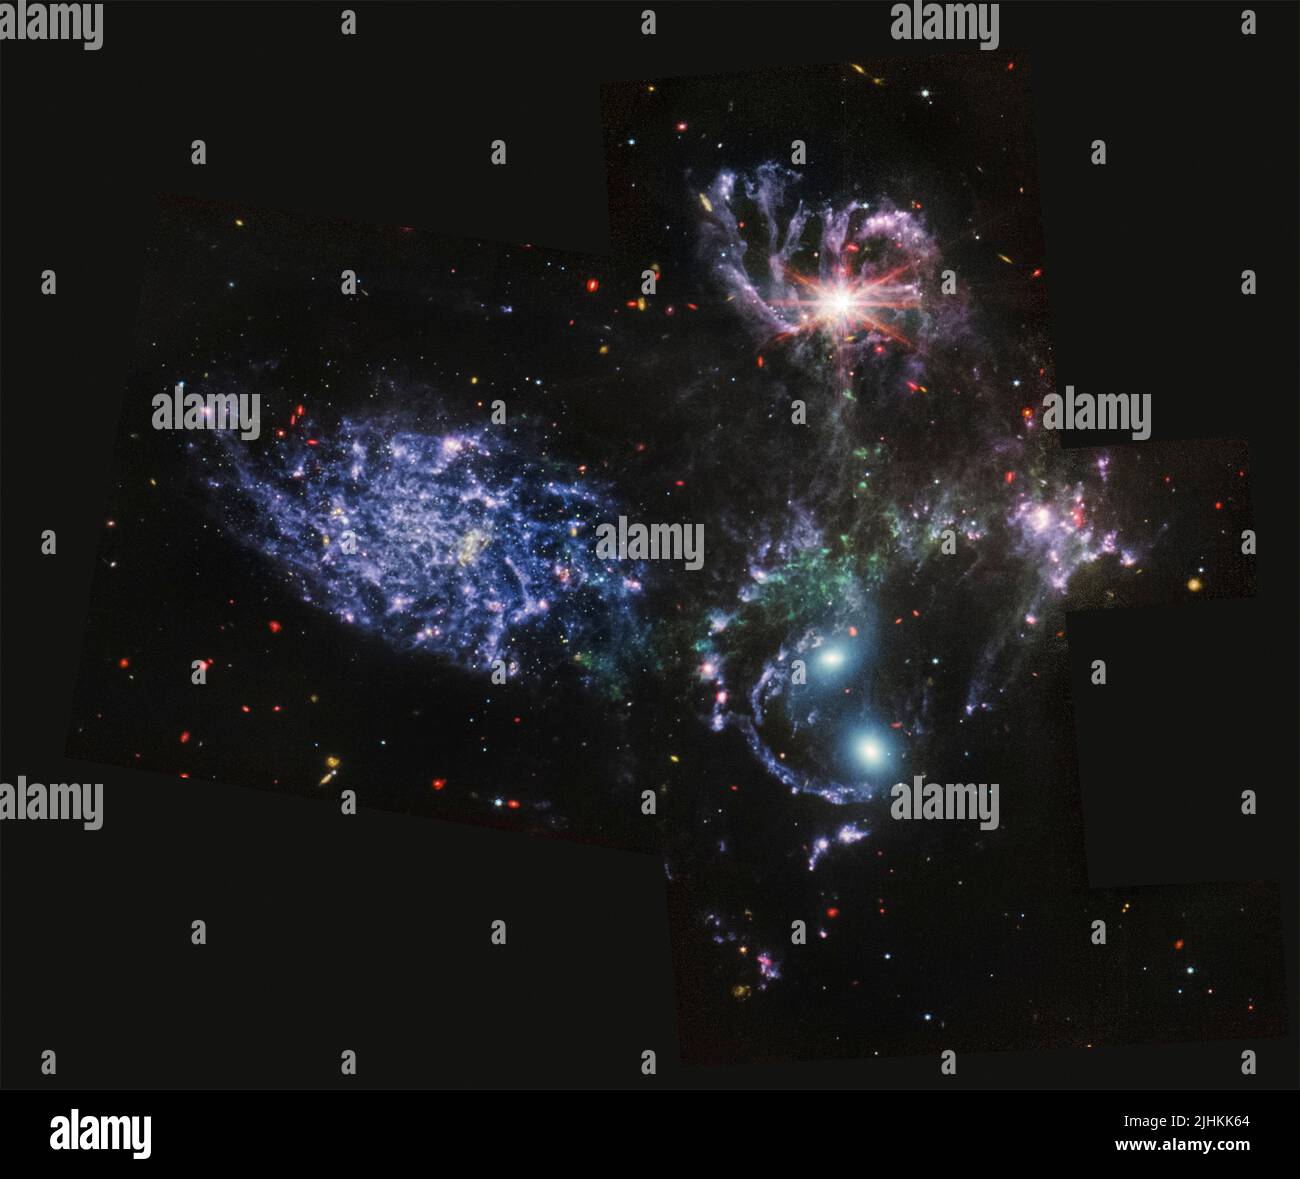 The visual grouping of five galaxies known as Stephans Quintet captured by the NASA Webb Telescope showing sparkling clusters of millions of young stars and starburst regions of fresh star being born, released from Goddard Space Flight Center July 12, 2022 in Greenbelt, Maryland. Stock Photo